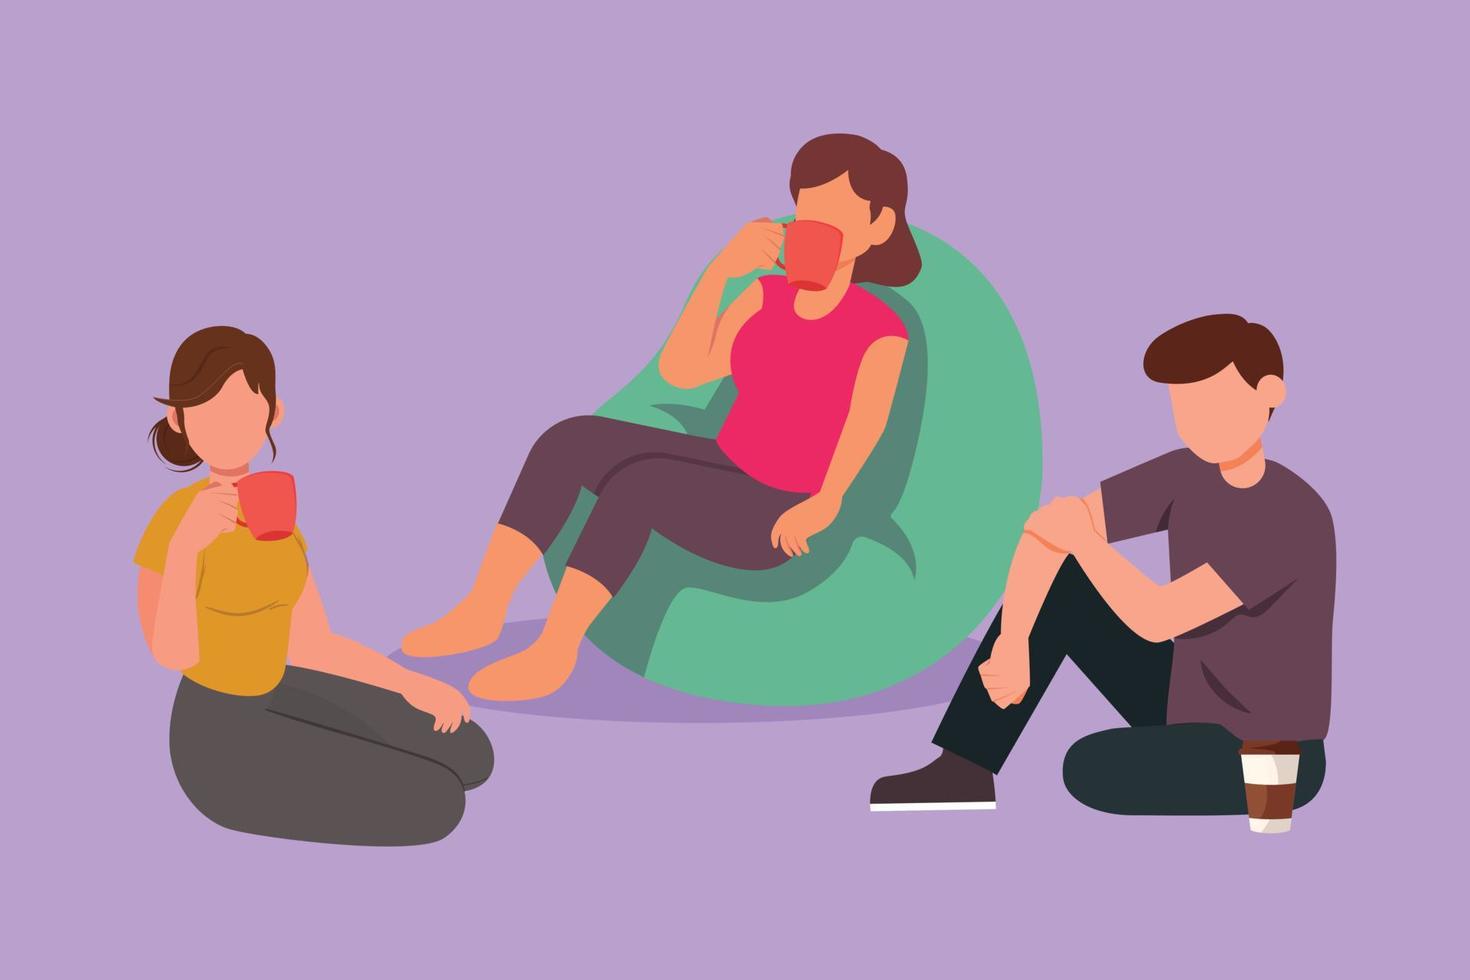 Graphic flat design drawing woman, man talking relaxing in home living room or office waiting lounge. Friends sitting drinking at dormitory hall with sofa, arm chair. Cartoon style vector illustration